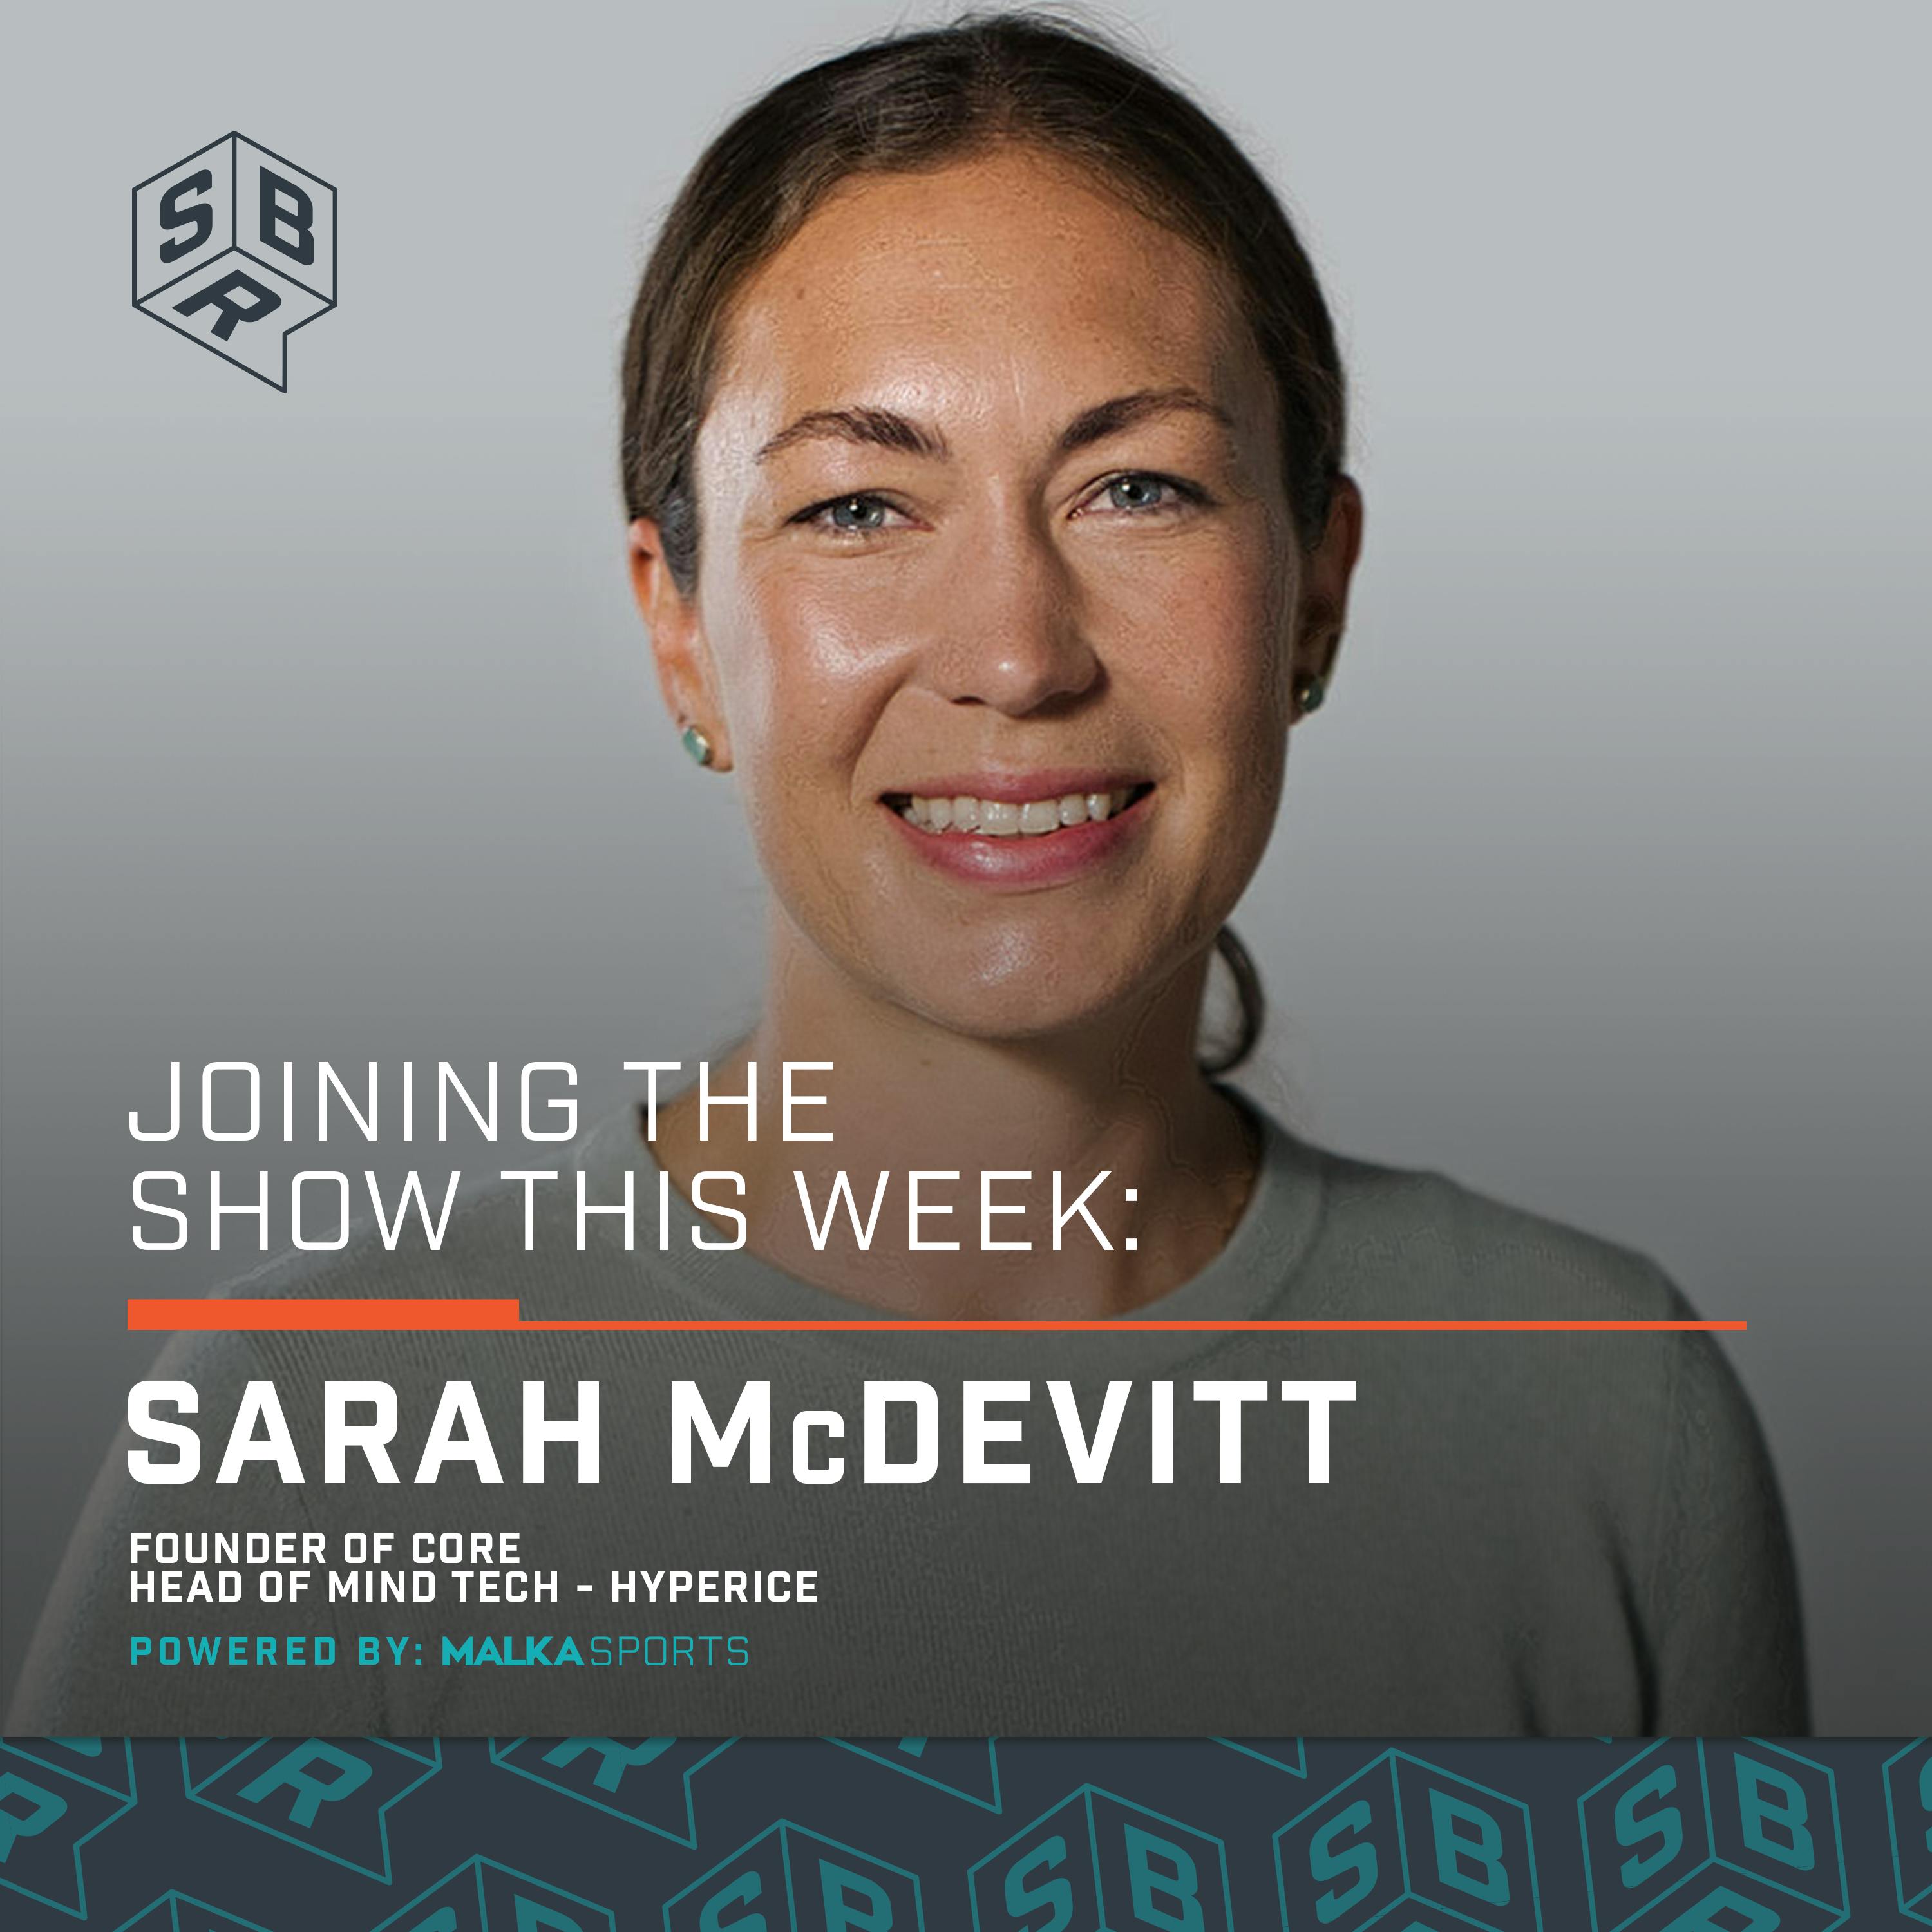 Sarah McDevitt - Founder and CEO of Core Wellness & Head of Mind Tech for Hyperice